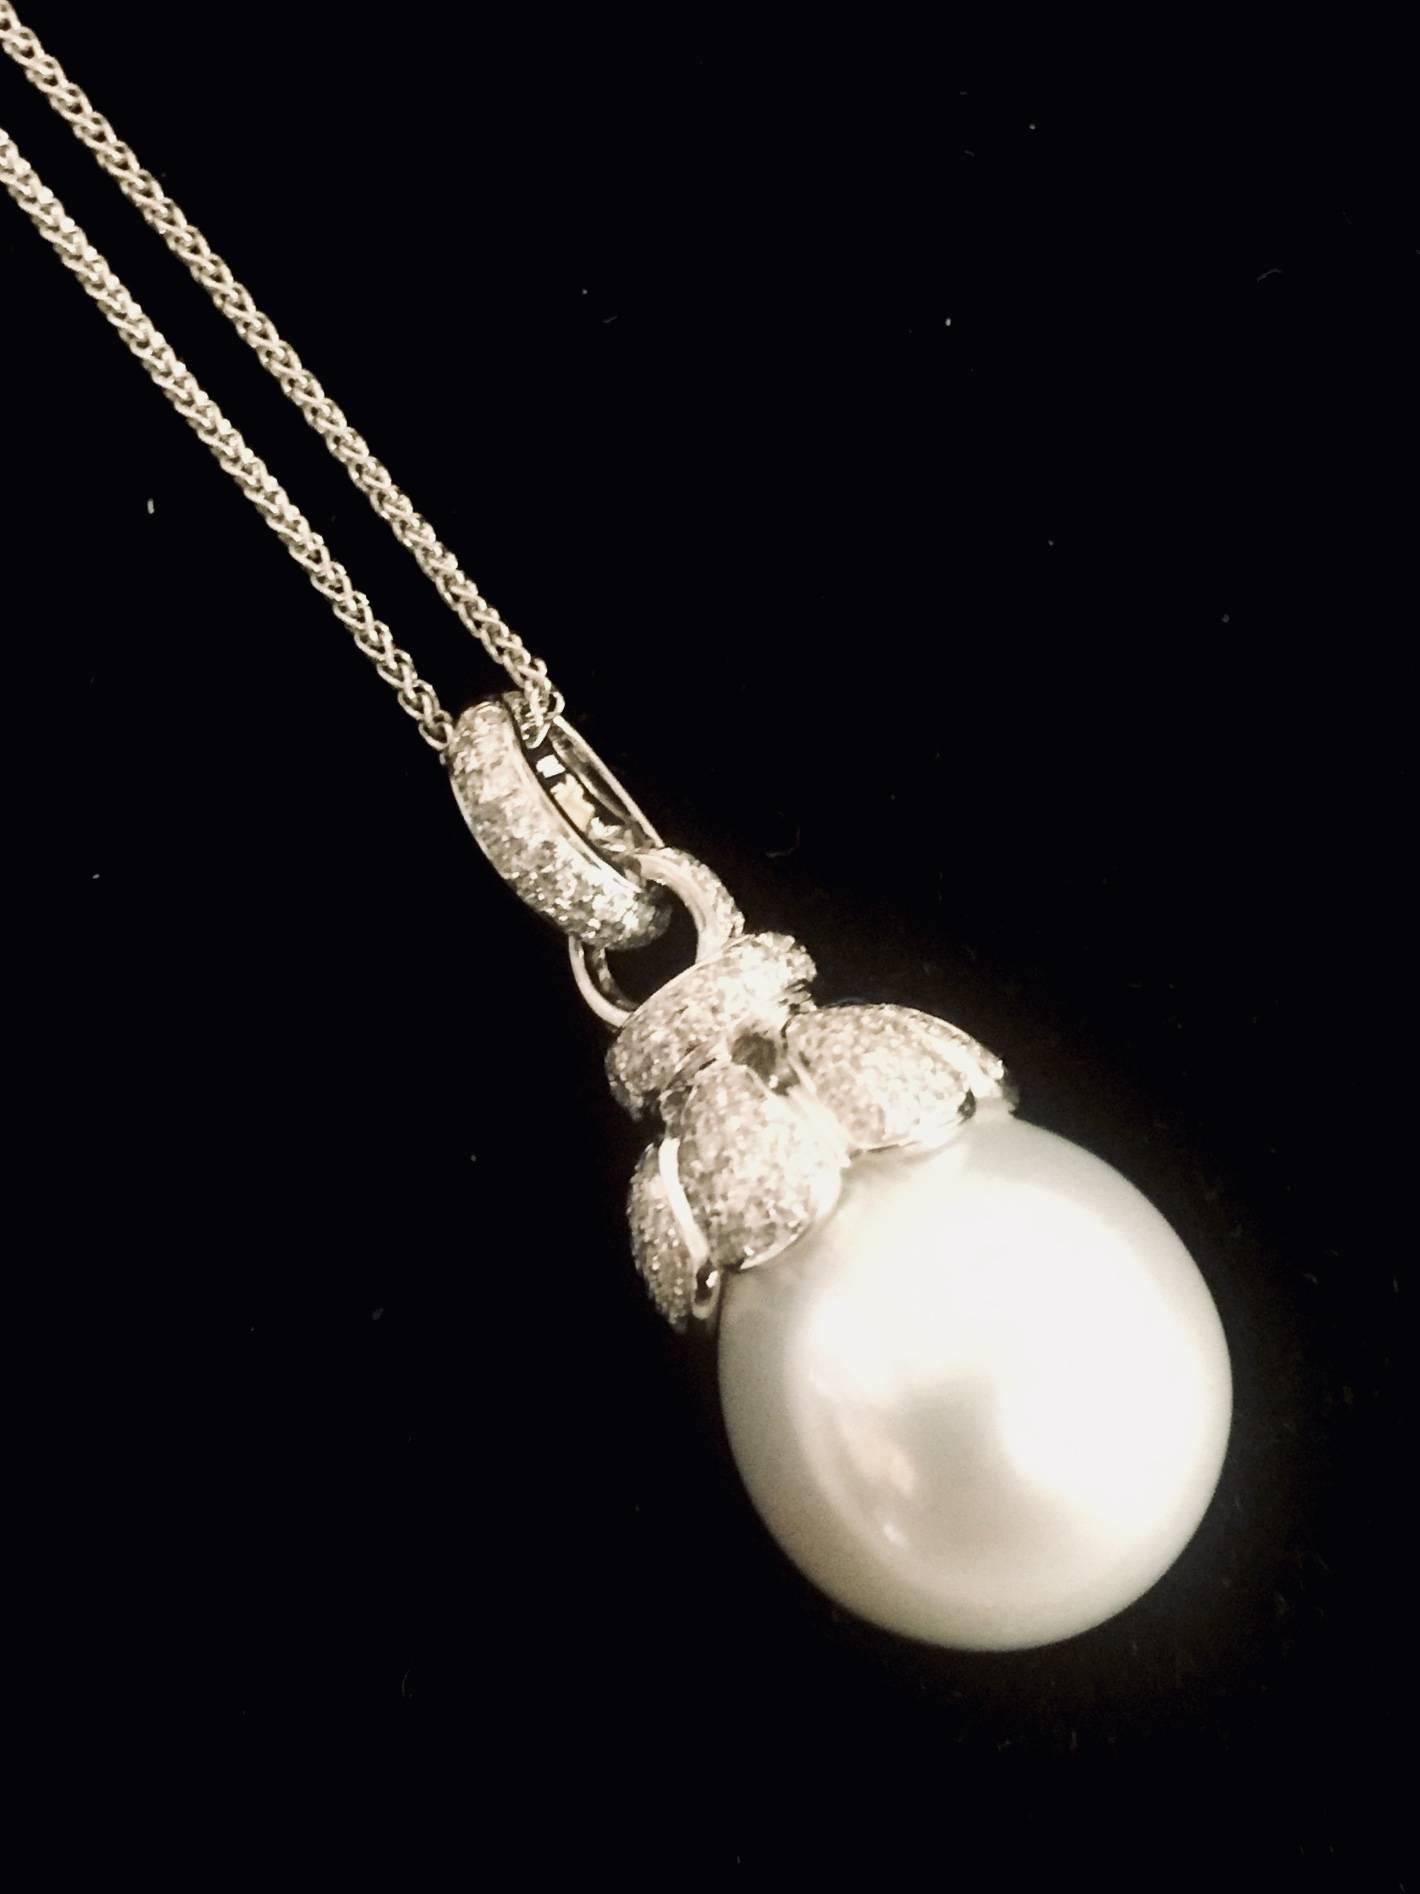 Elegance in Simplicity is the greatest description to this splendid South Sea Pearl and Diamond necklace.  18 karat white gold open link chain finished with lobster claw clasp proudly holds a diamond capped 13.5mm white South Sea pearl.  The curved,